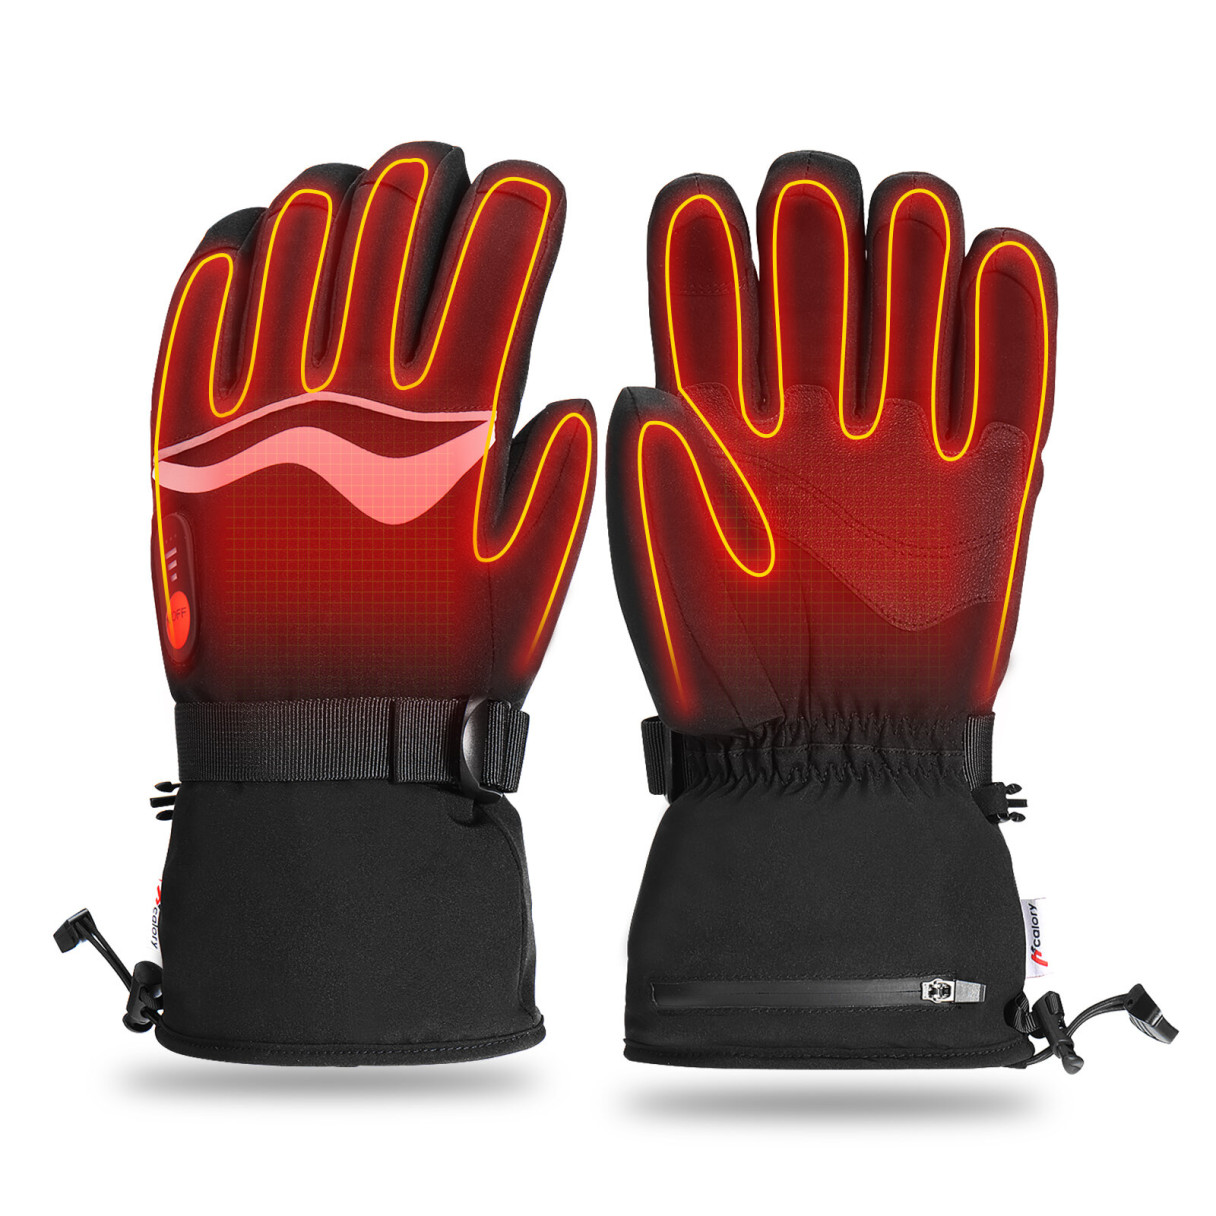 Hcalory 45/55/65℃ 1Pair Black Electric Heated Gloves Waterproof Warm Gloves for Outdoor Sports